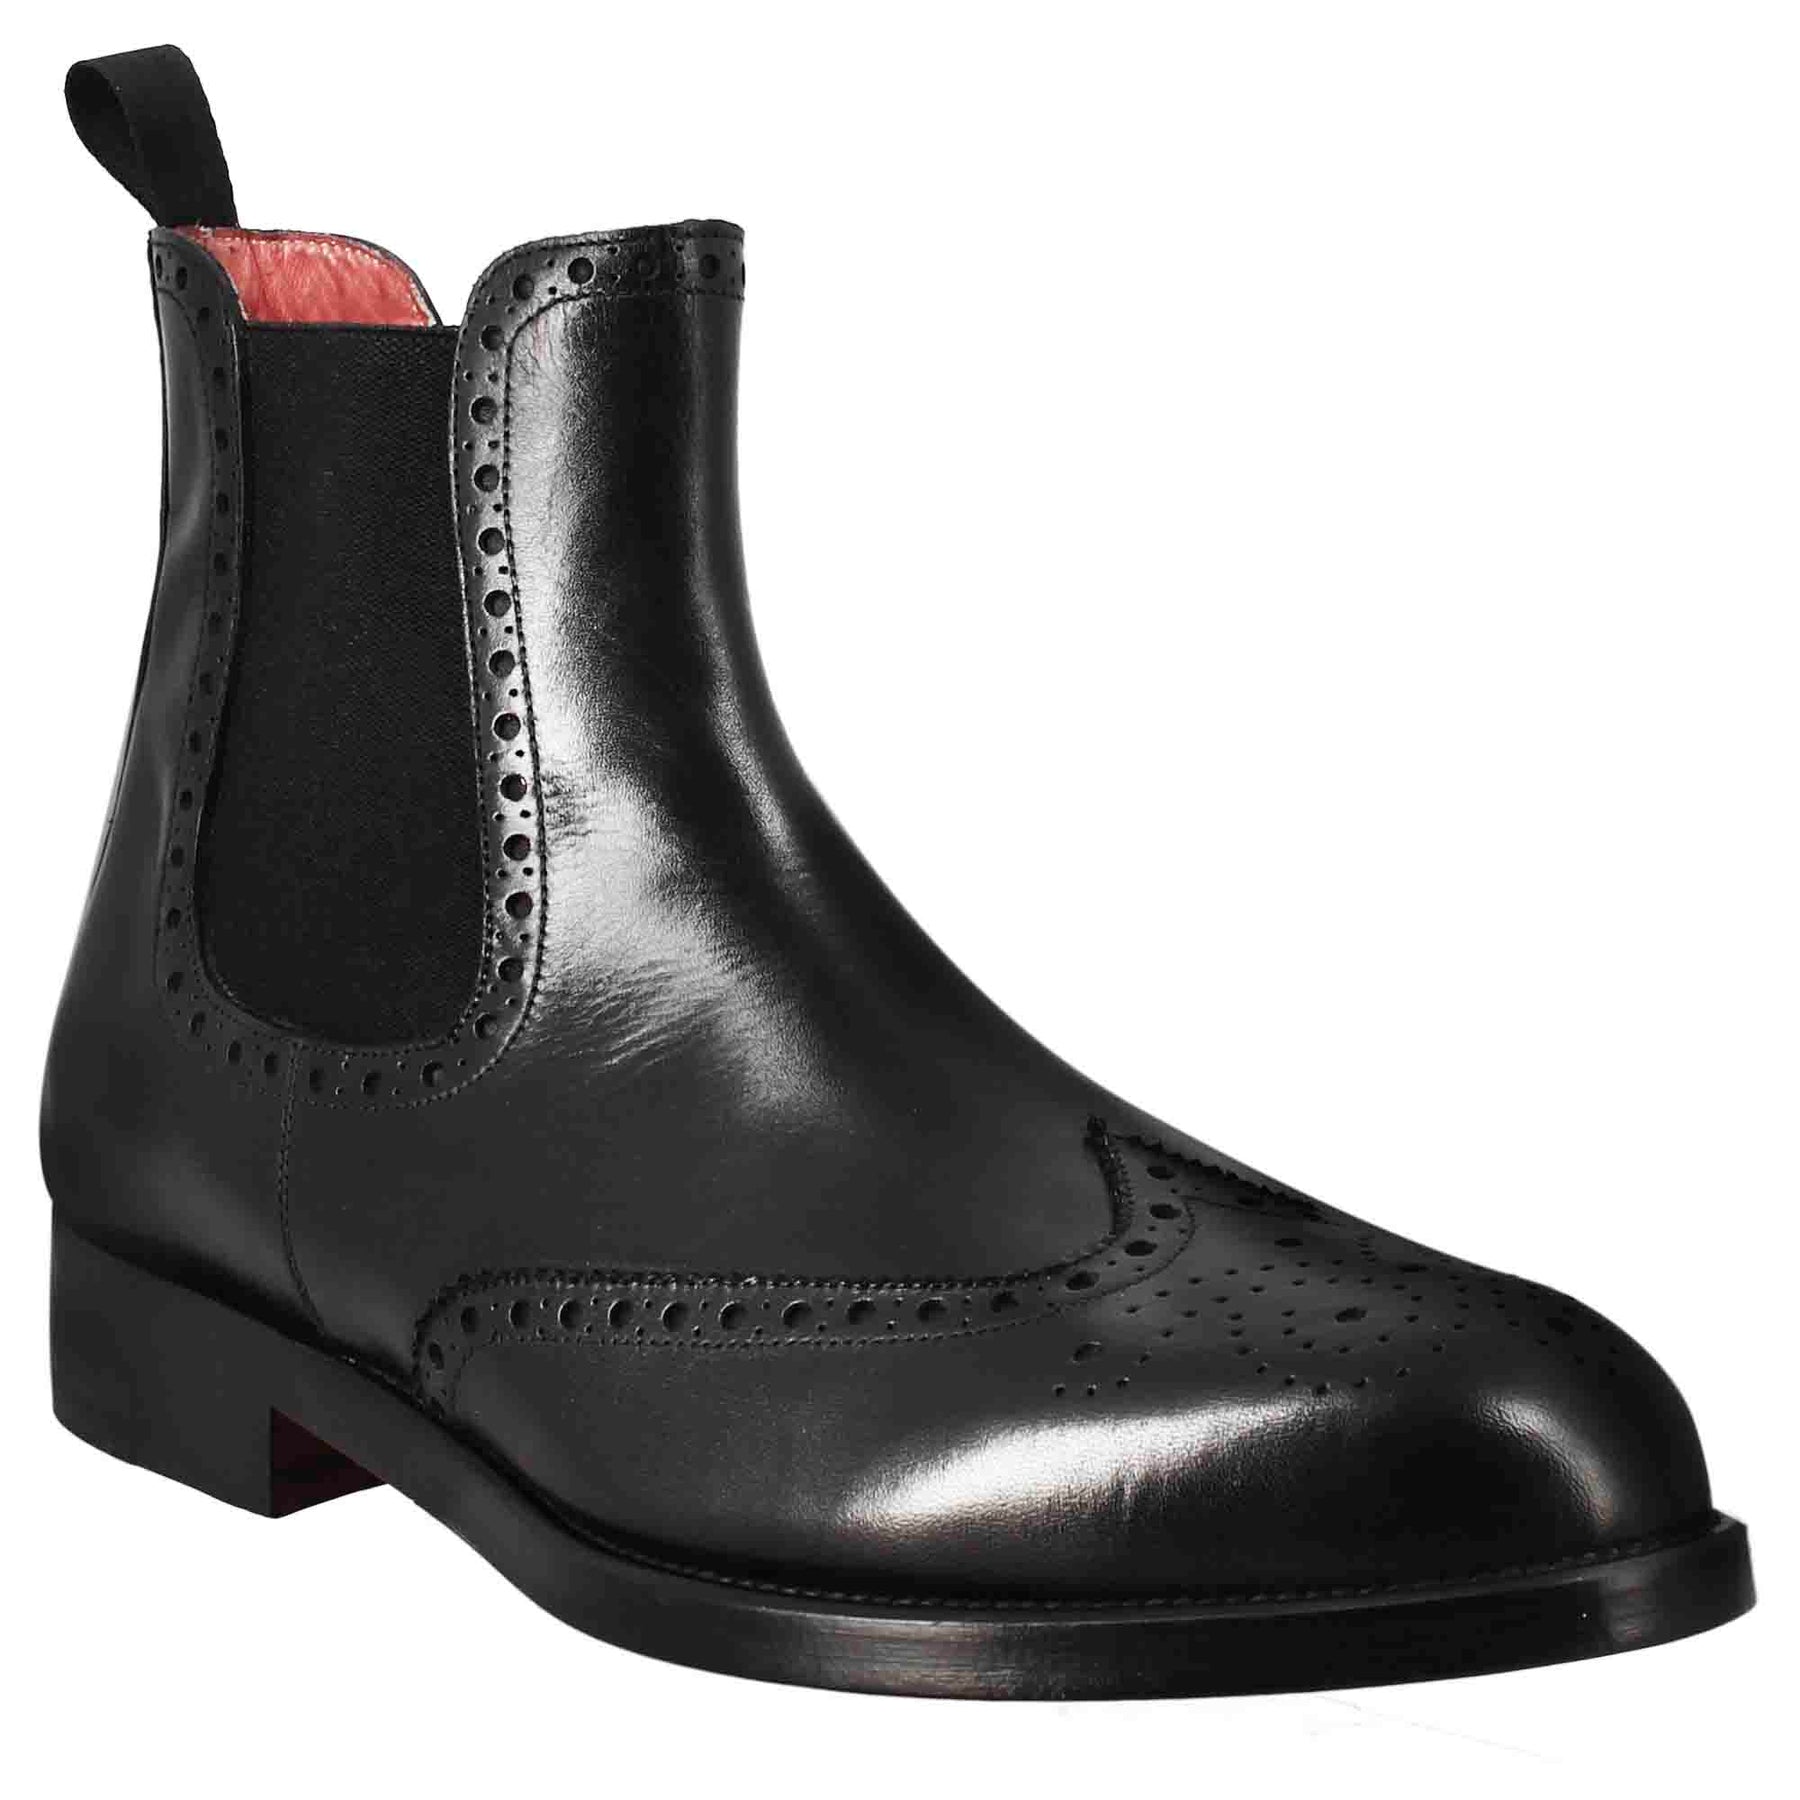 Chelsea boot with brogue details for men in black leather with elastic